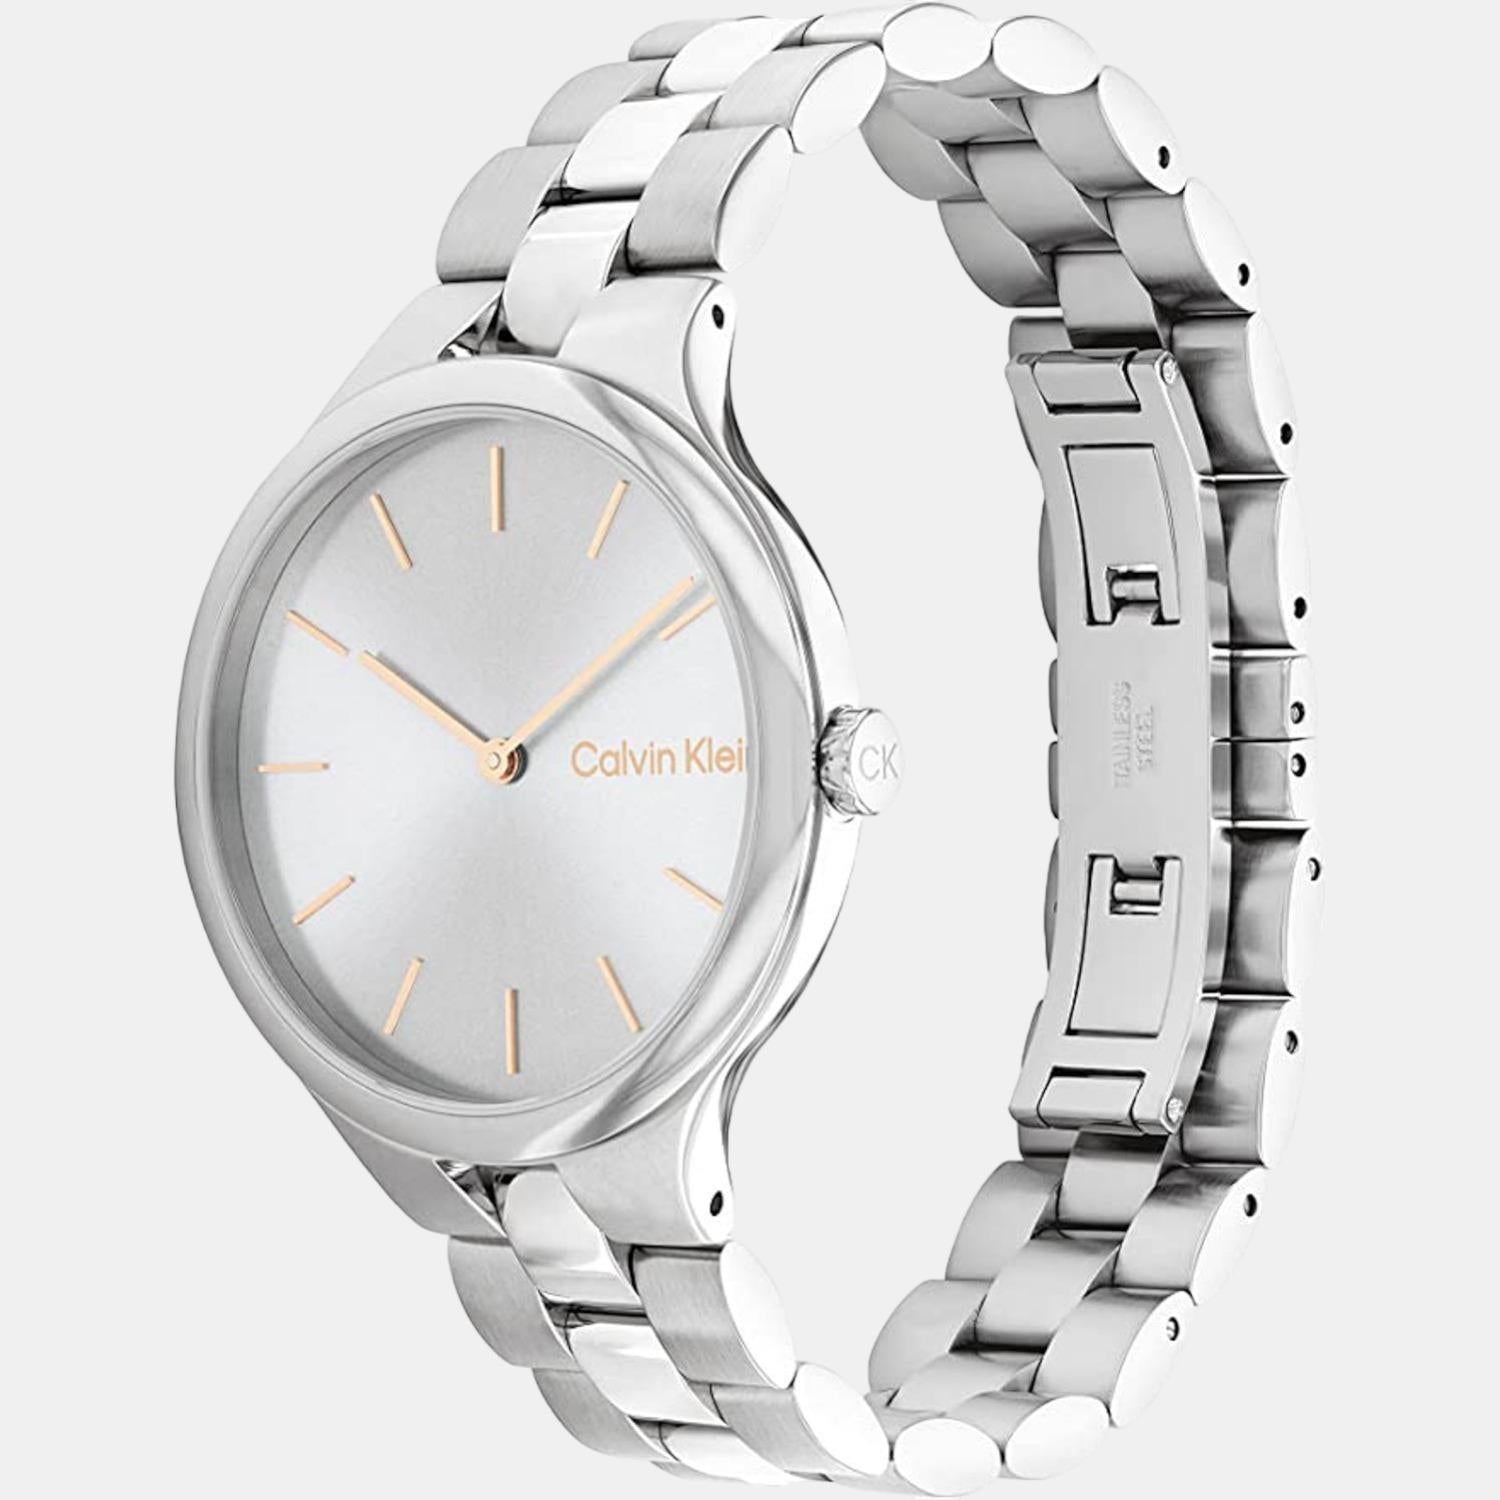 The unconventional, singular elegance of square watches